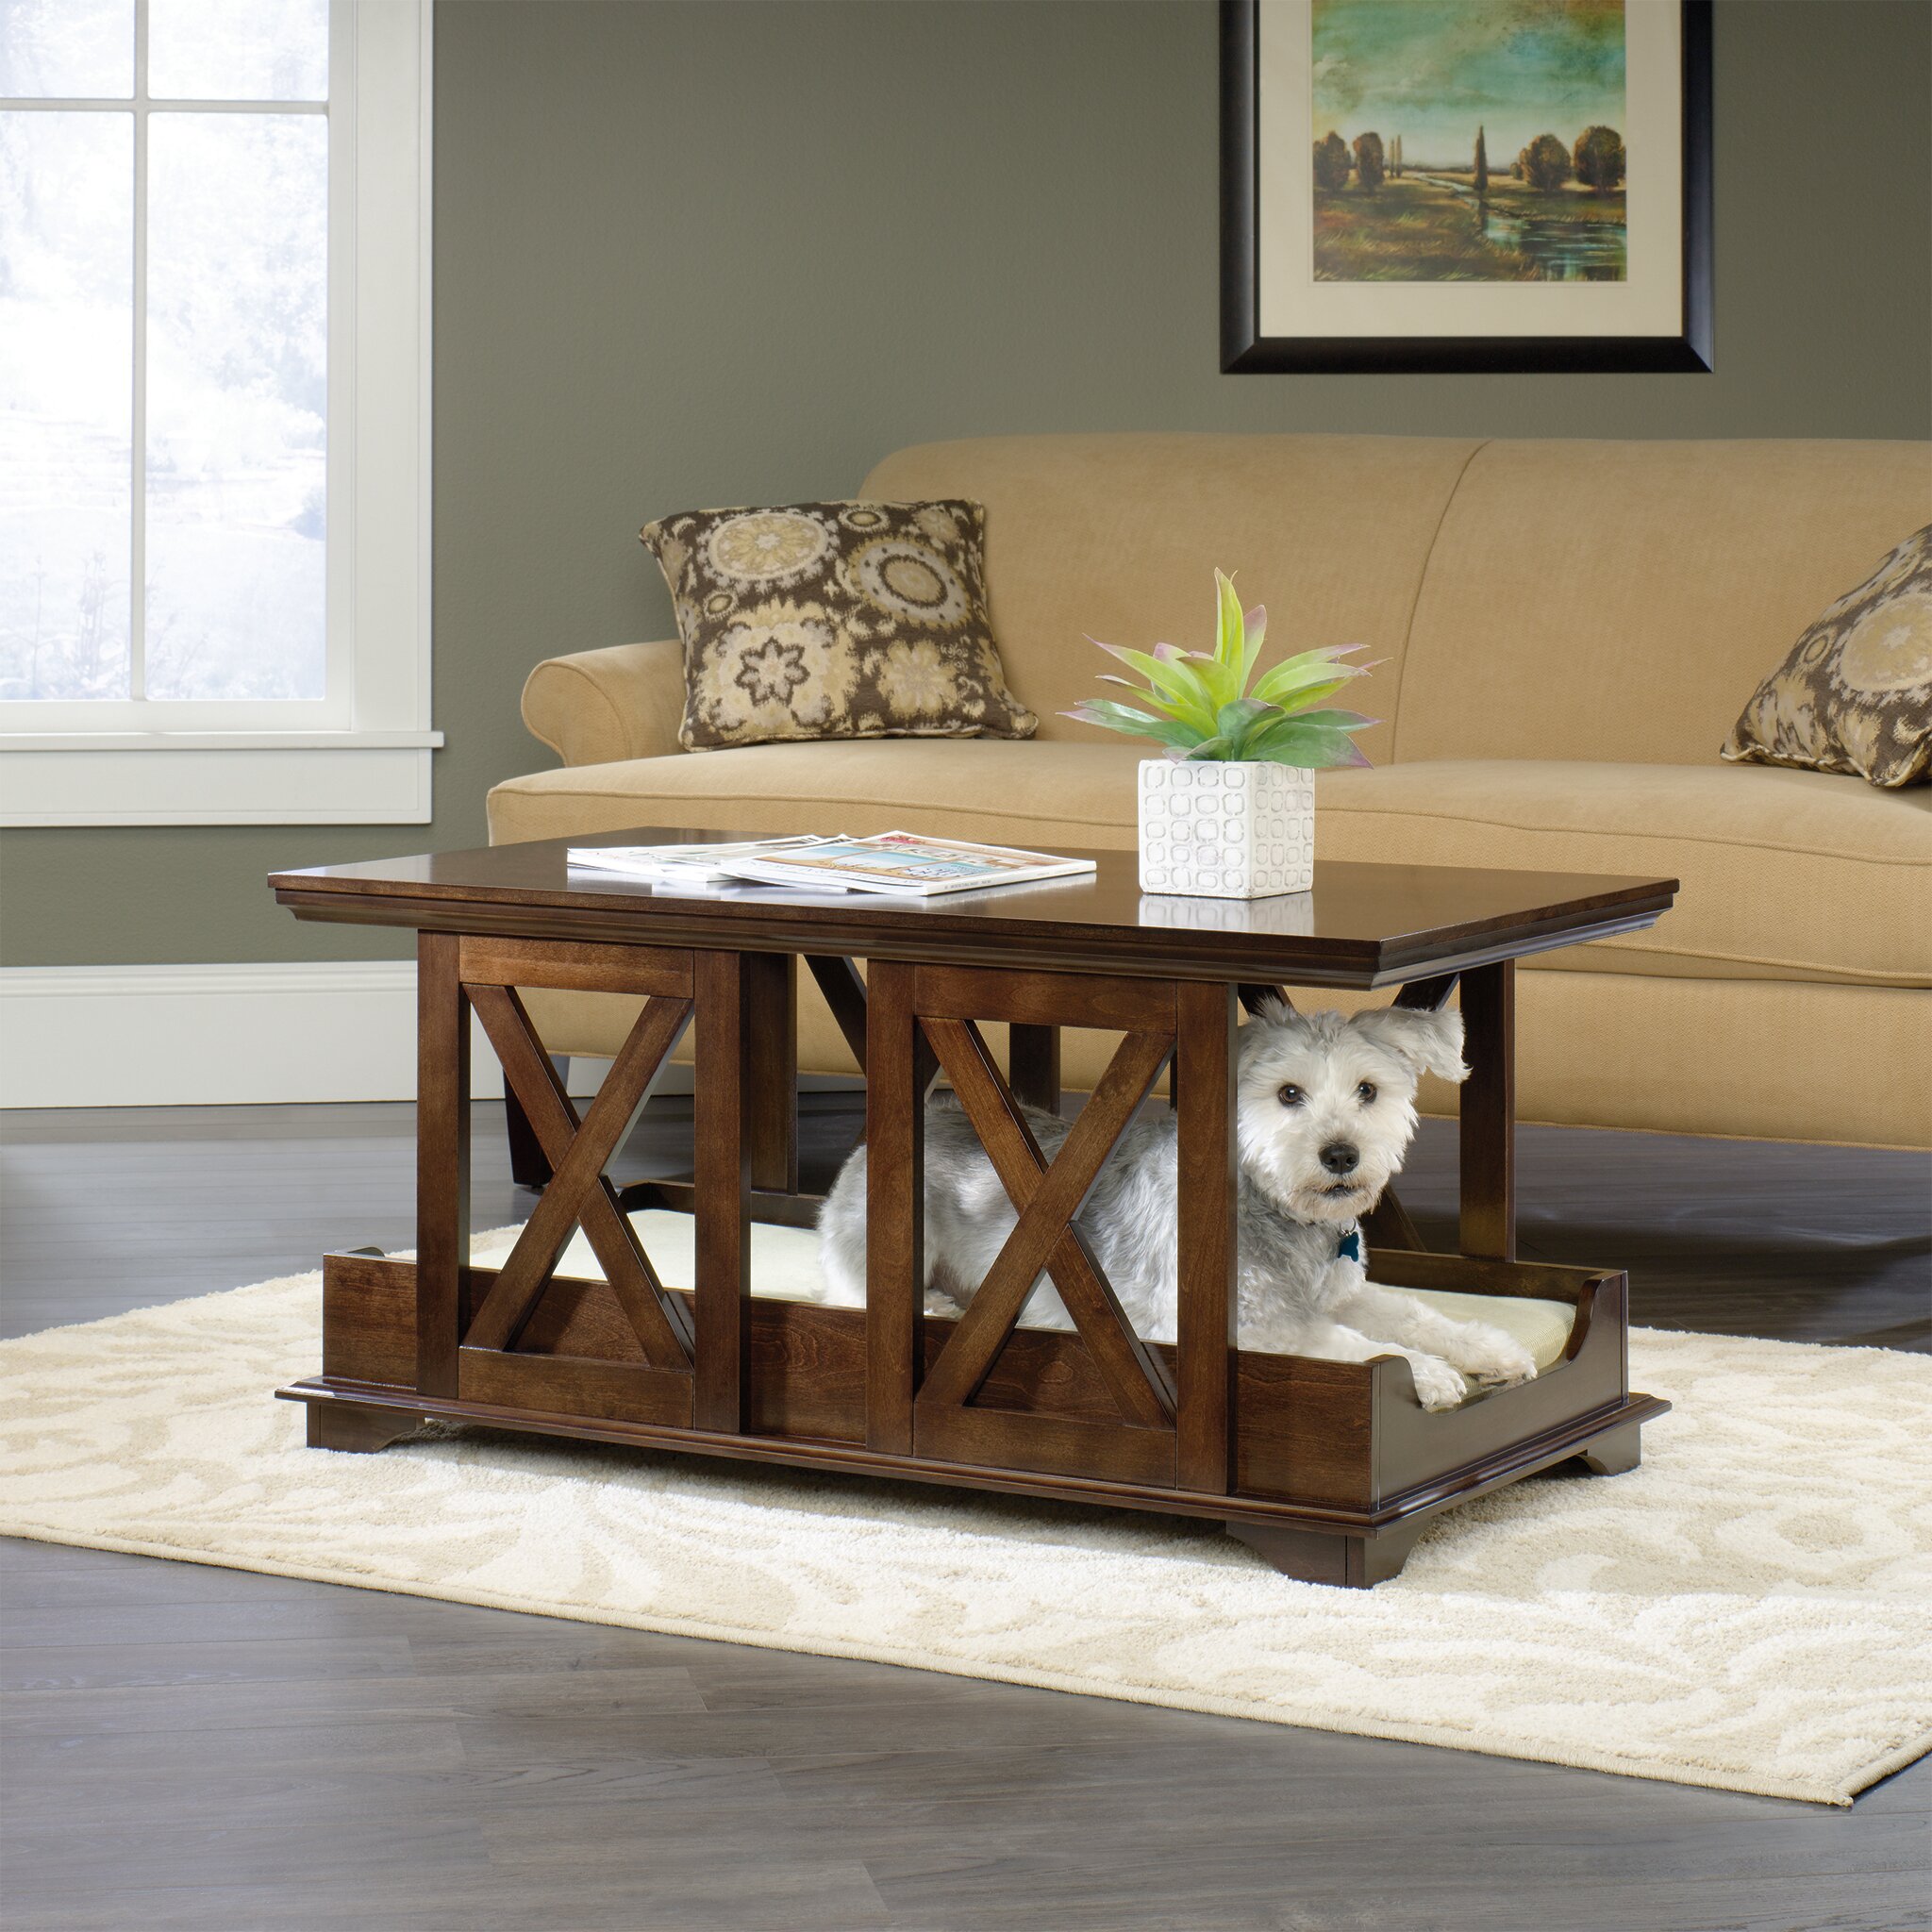 Simple End Table Pet Bed with Simple Decor